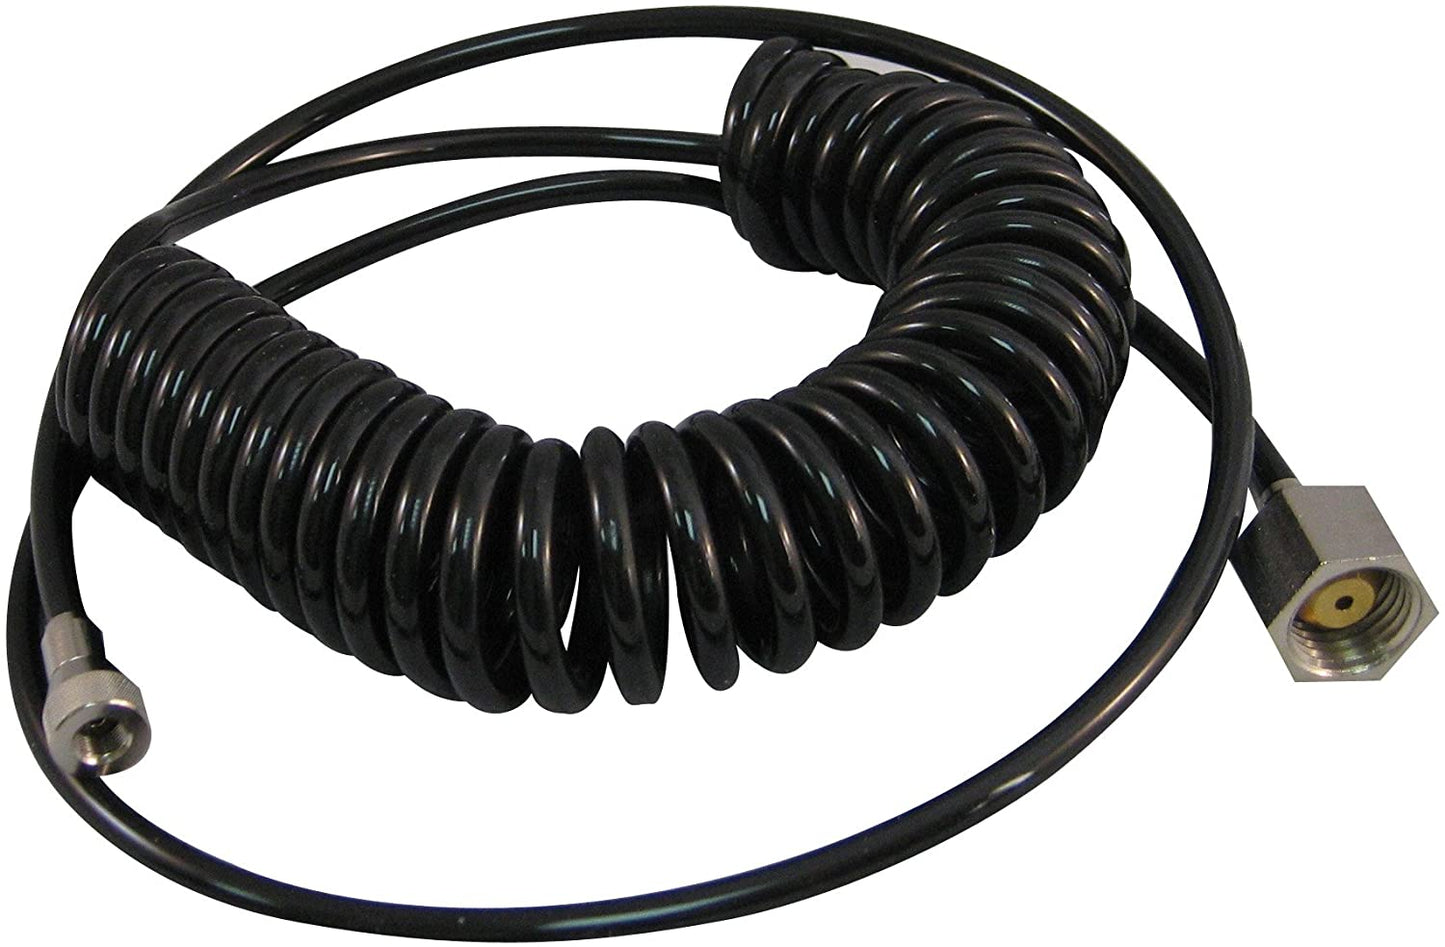 10' Re-Coil Hose for Badger/Thayer/Chand